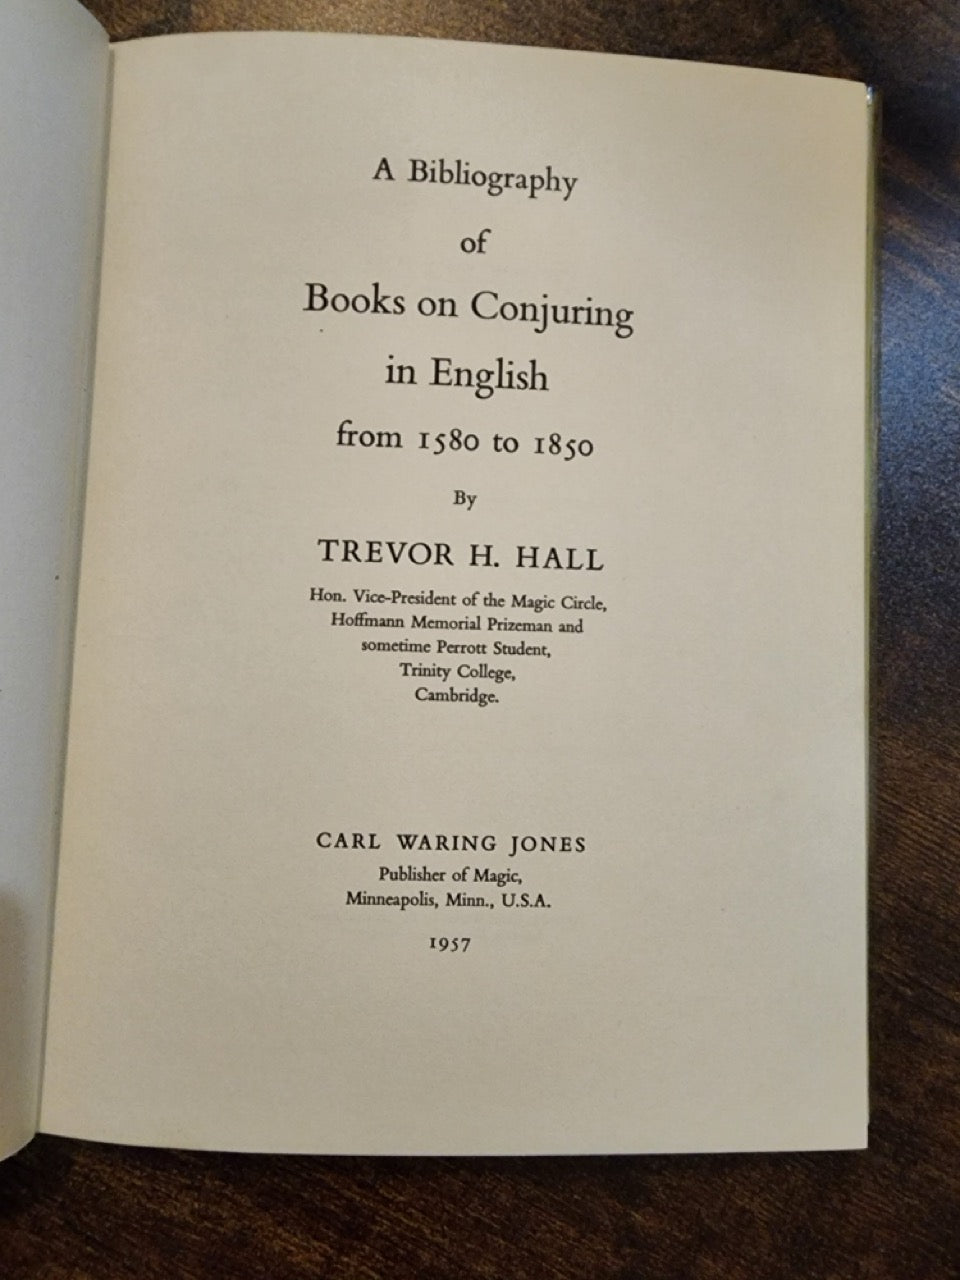 A Bibliography of Books on Conjuring in English from 1580 to 1850 - Trevor H. Hall